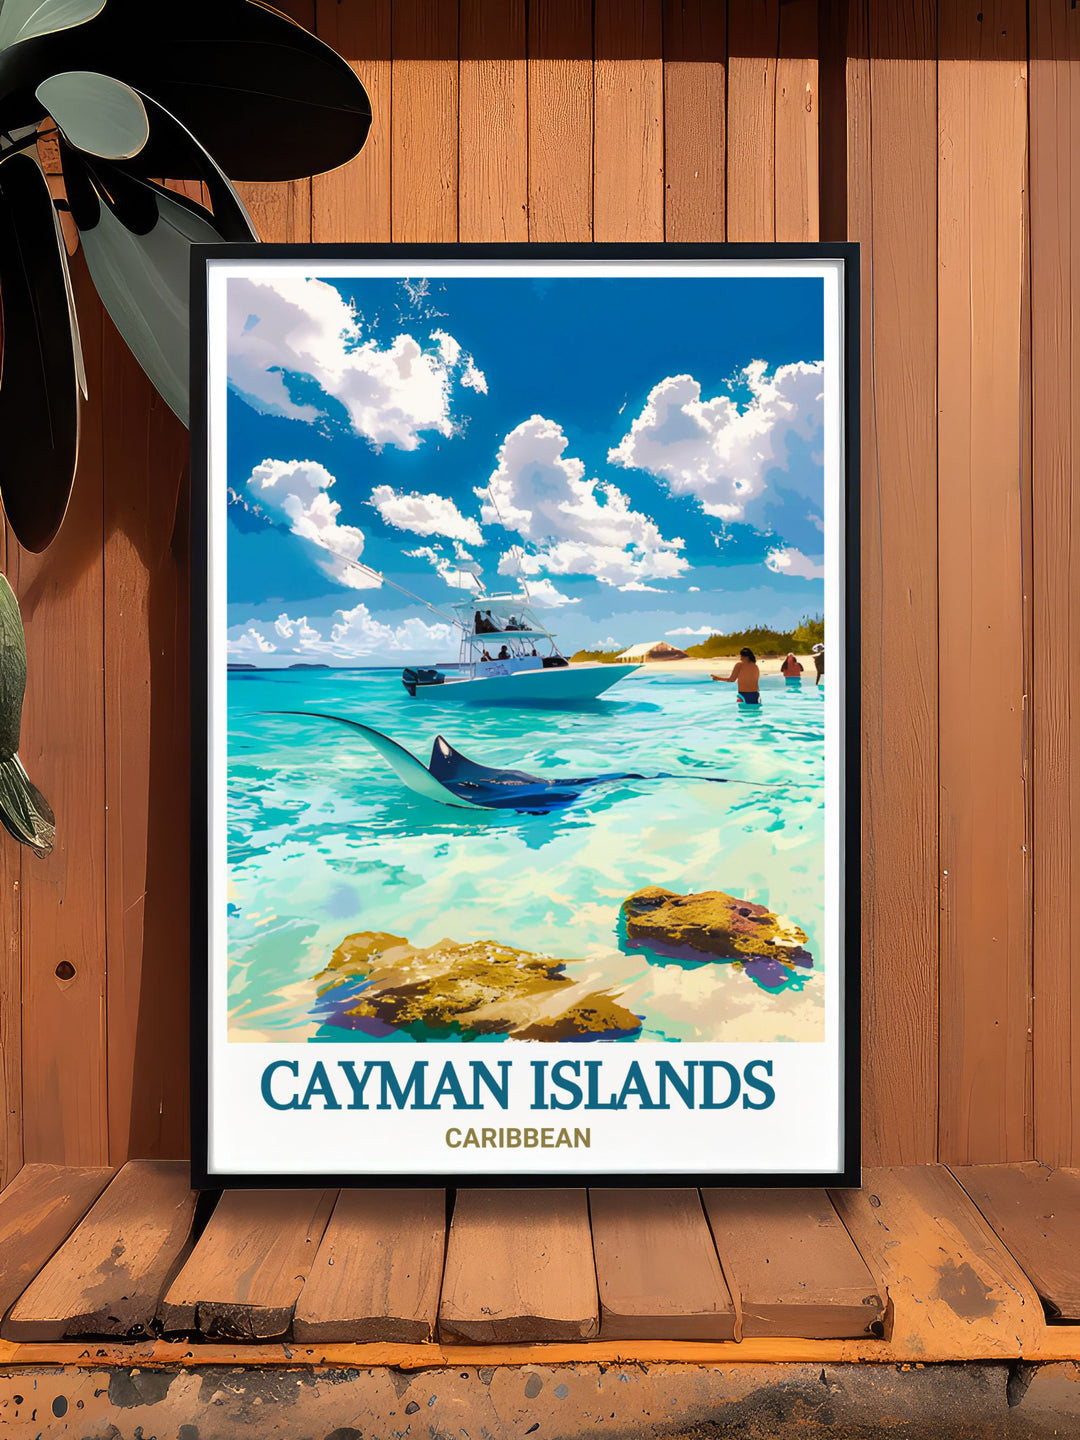 Captivating Stingray City poster highlighting the scenic marine landscapes of the Cayman Islands perfect for creating a tranquil ambiance in your living space and available as a travel poster print or personalized gift